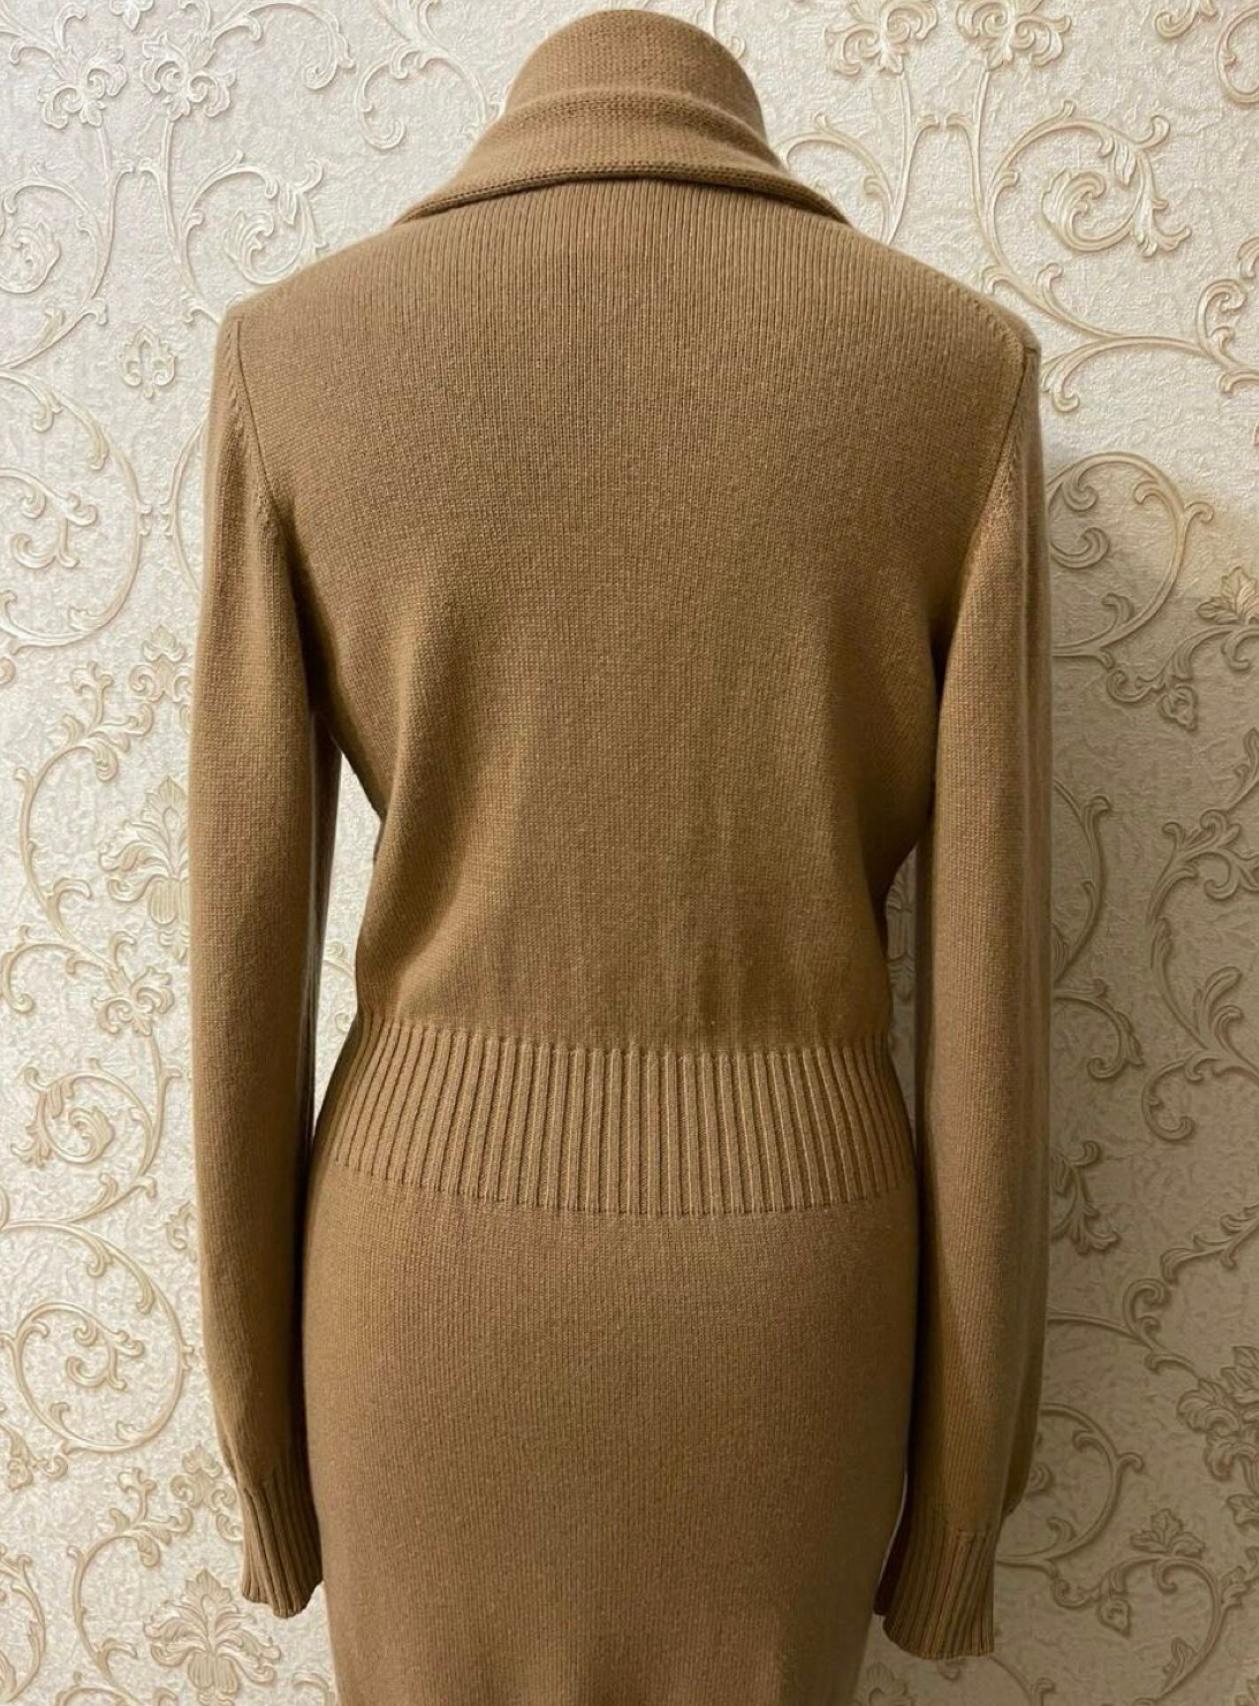 Chanel Claudia Schiffer Style Camel Cashmere Cardi Coat For Sale 2